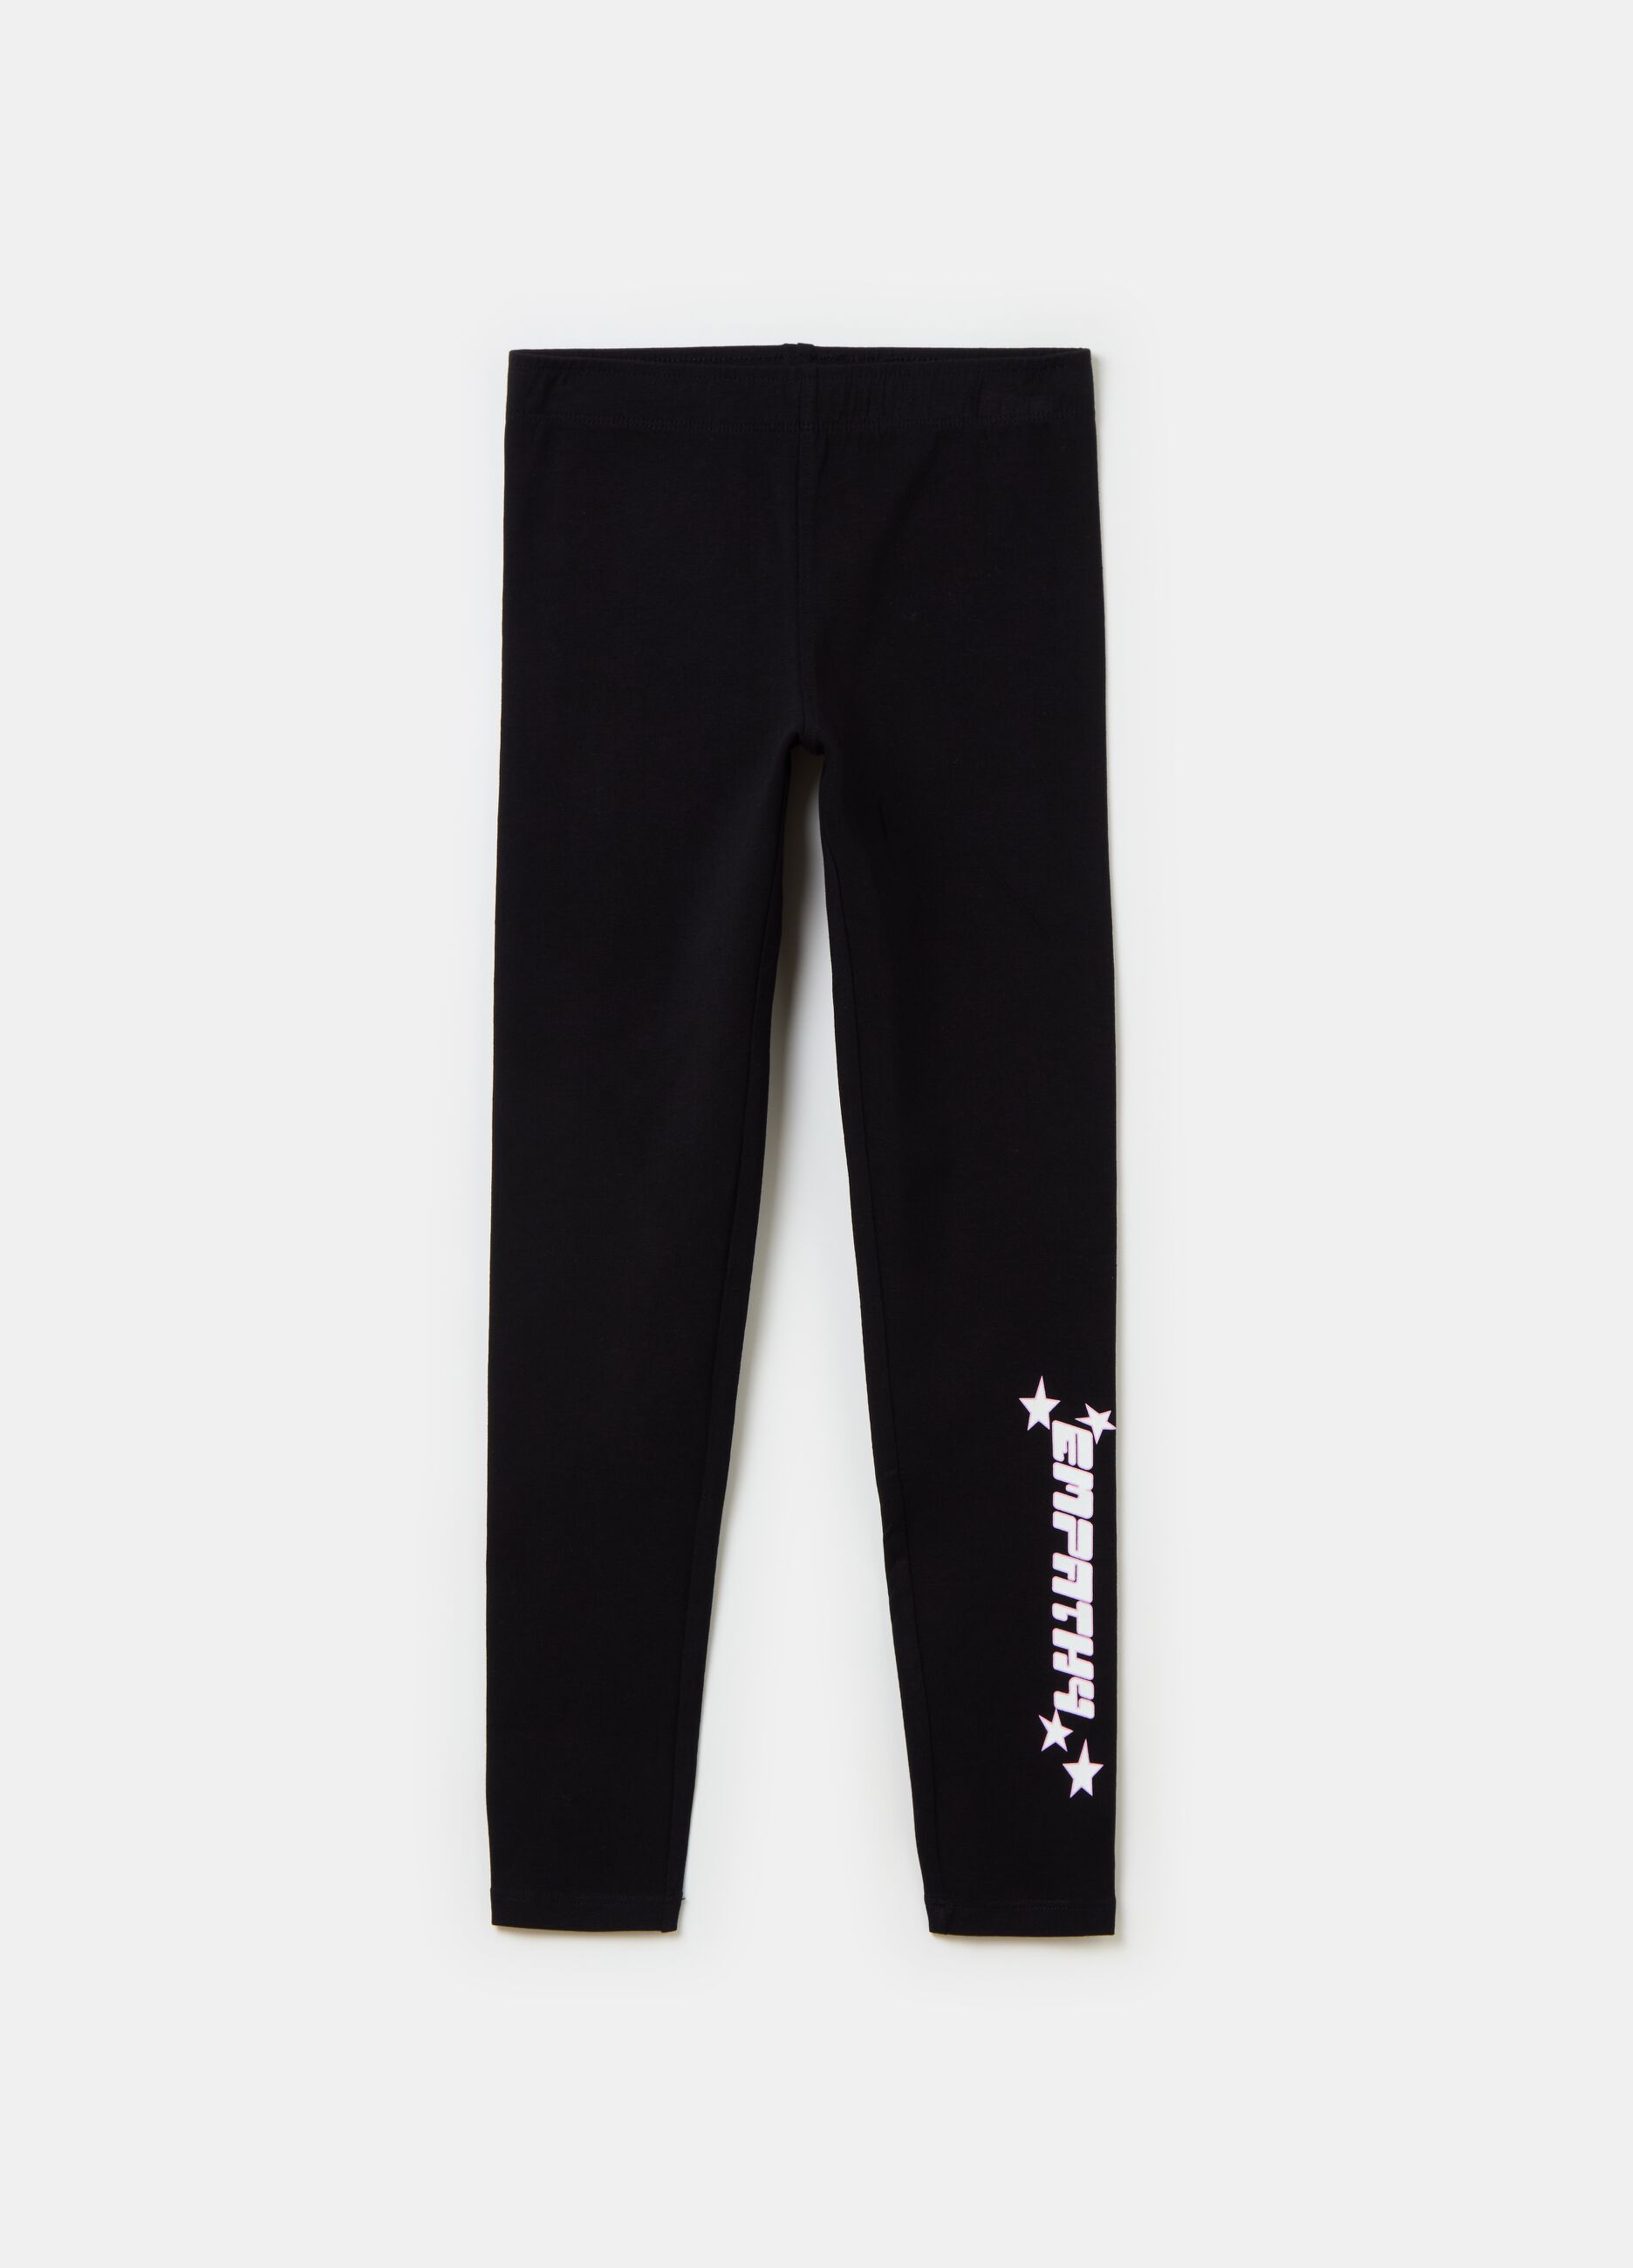 Stretch leggings with lettering print